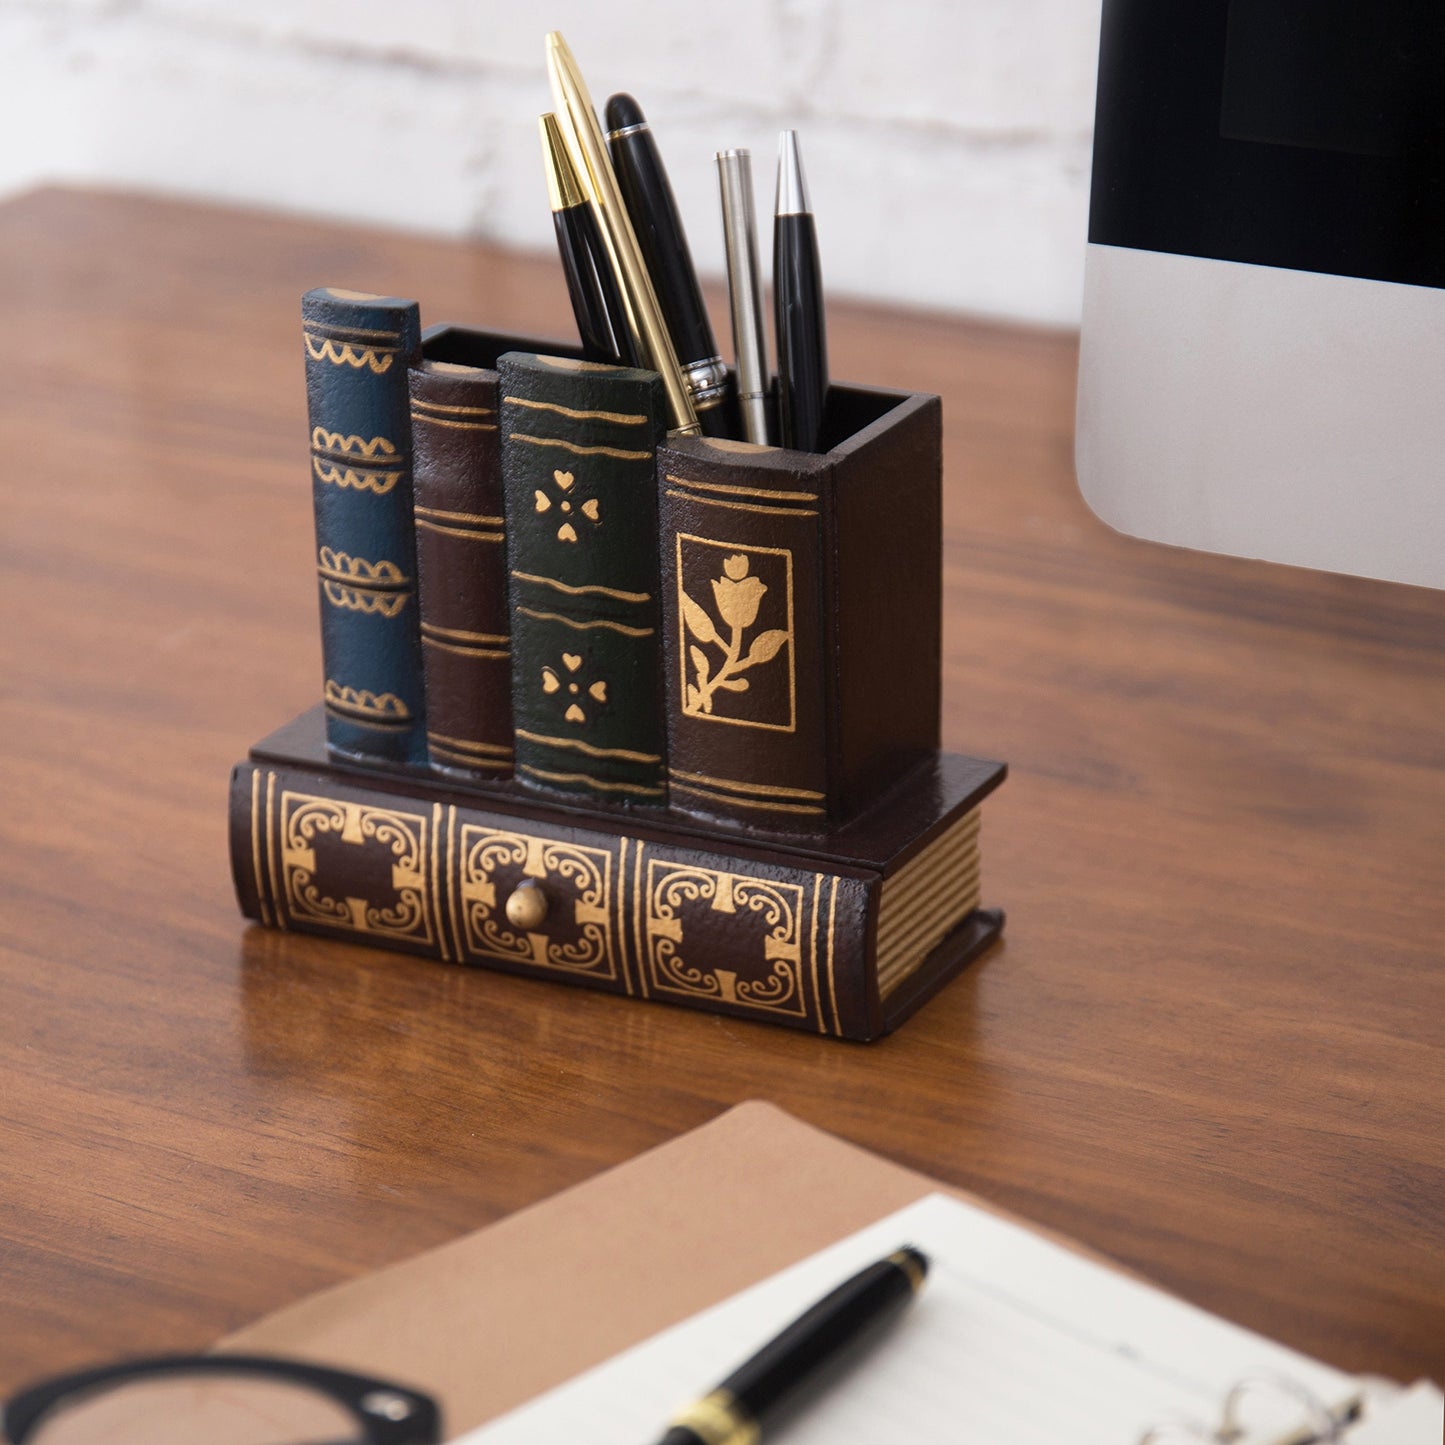 MyGift Decorative Desk Organizer Caddy, Pencil and Pen Holder with Bottom Storage Drawer and Antique Library Books Design